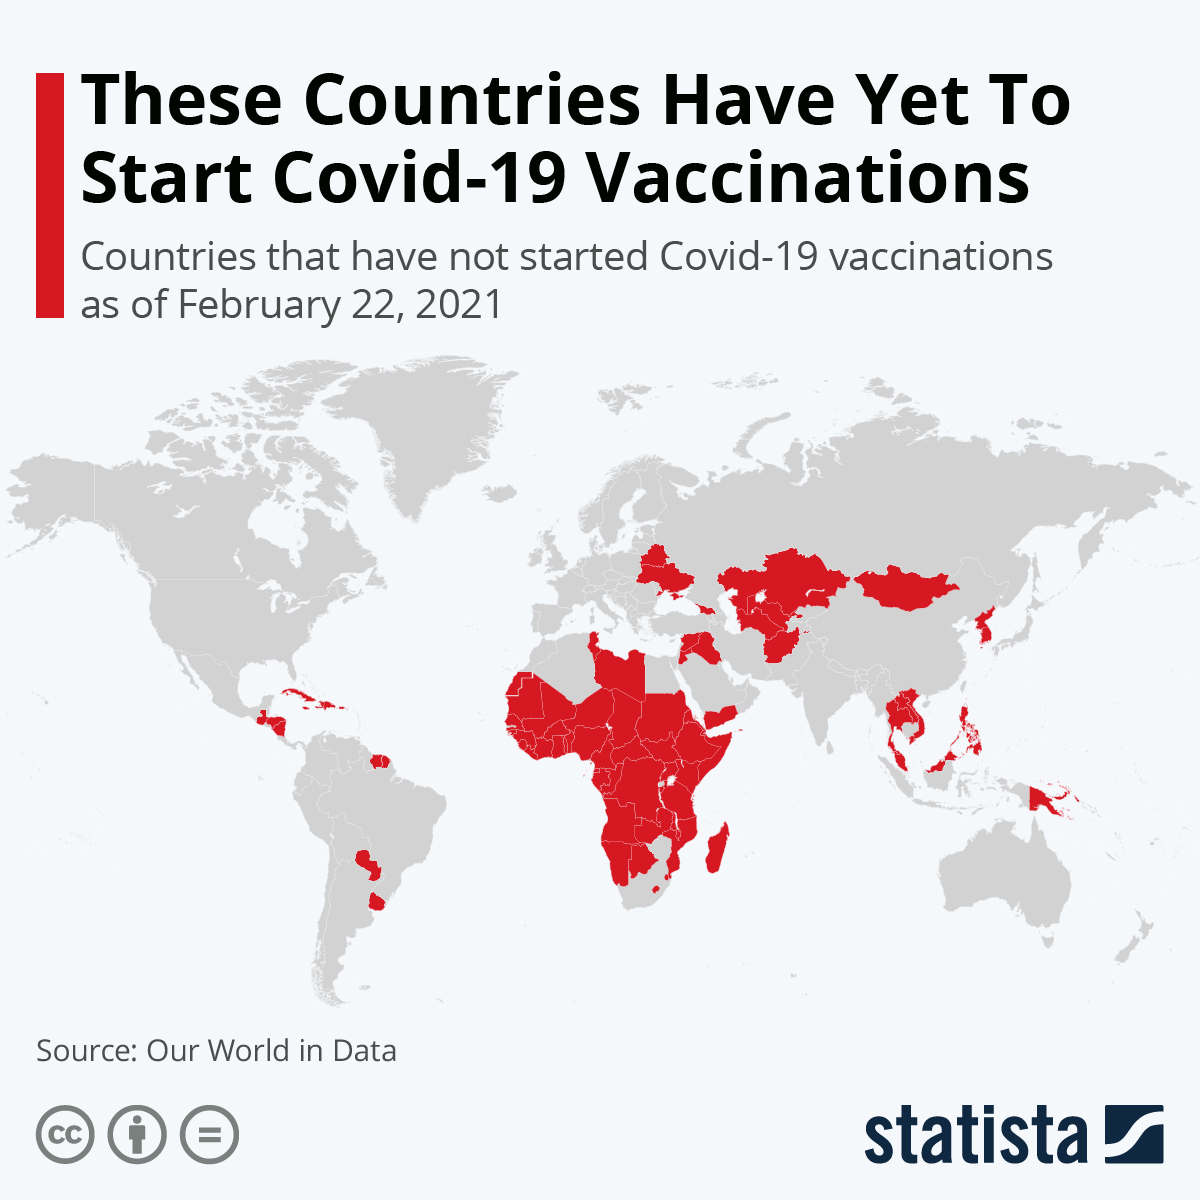 These Countries Have Yet to Start COVID-19 Vaccinations